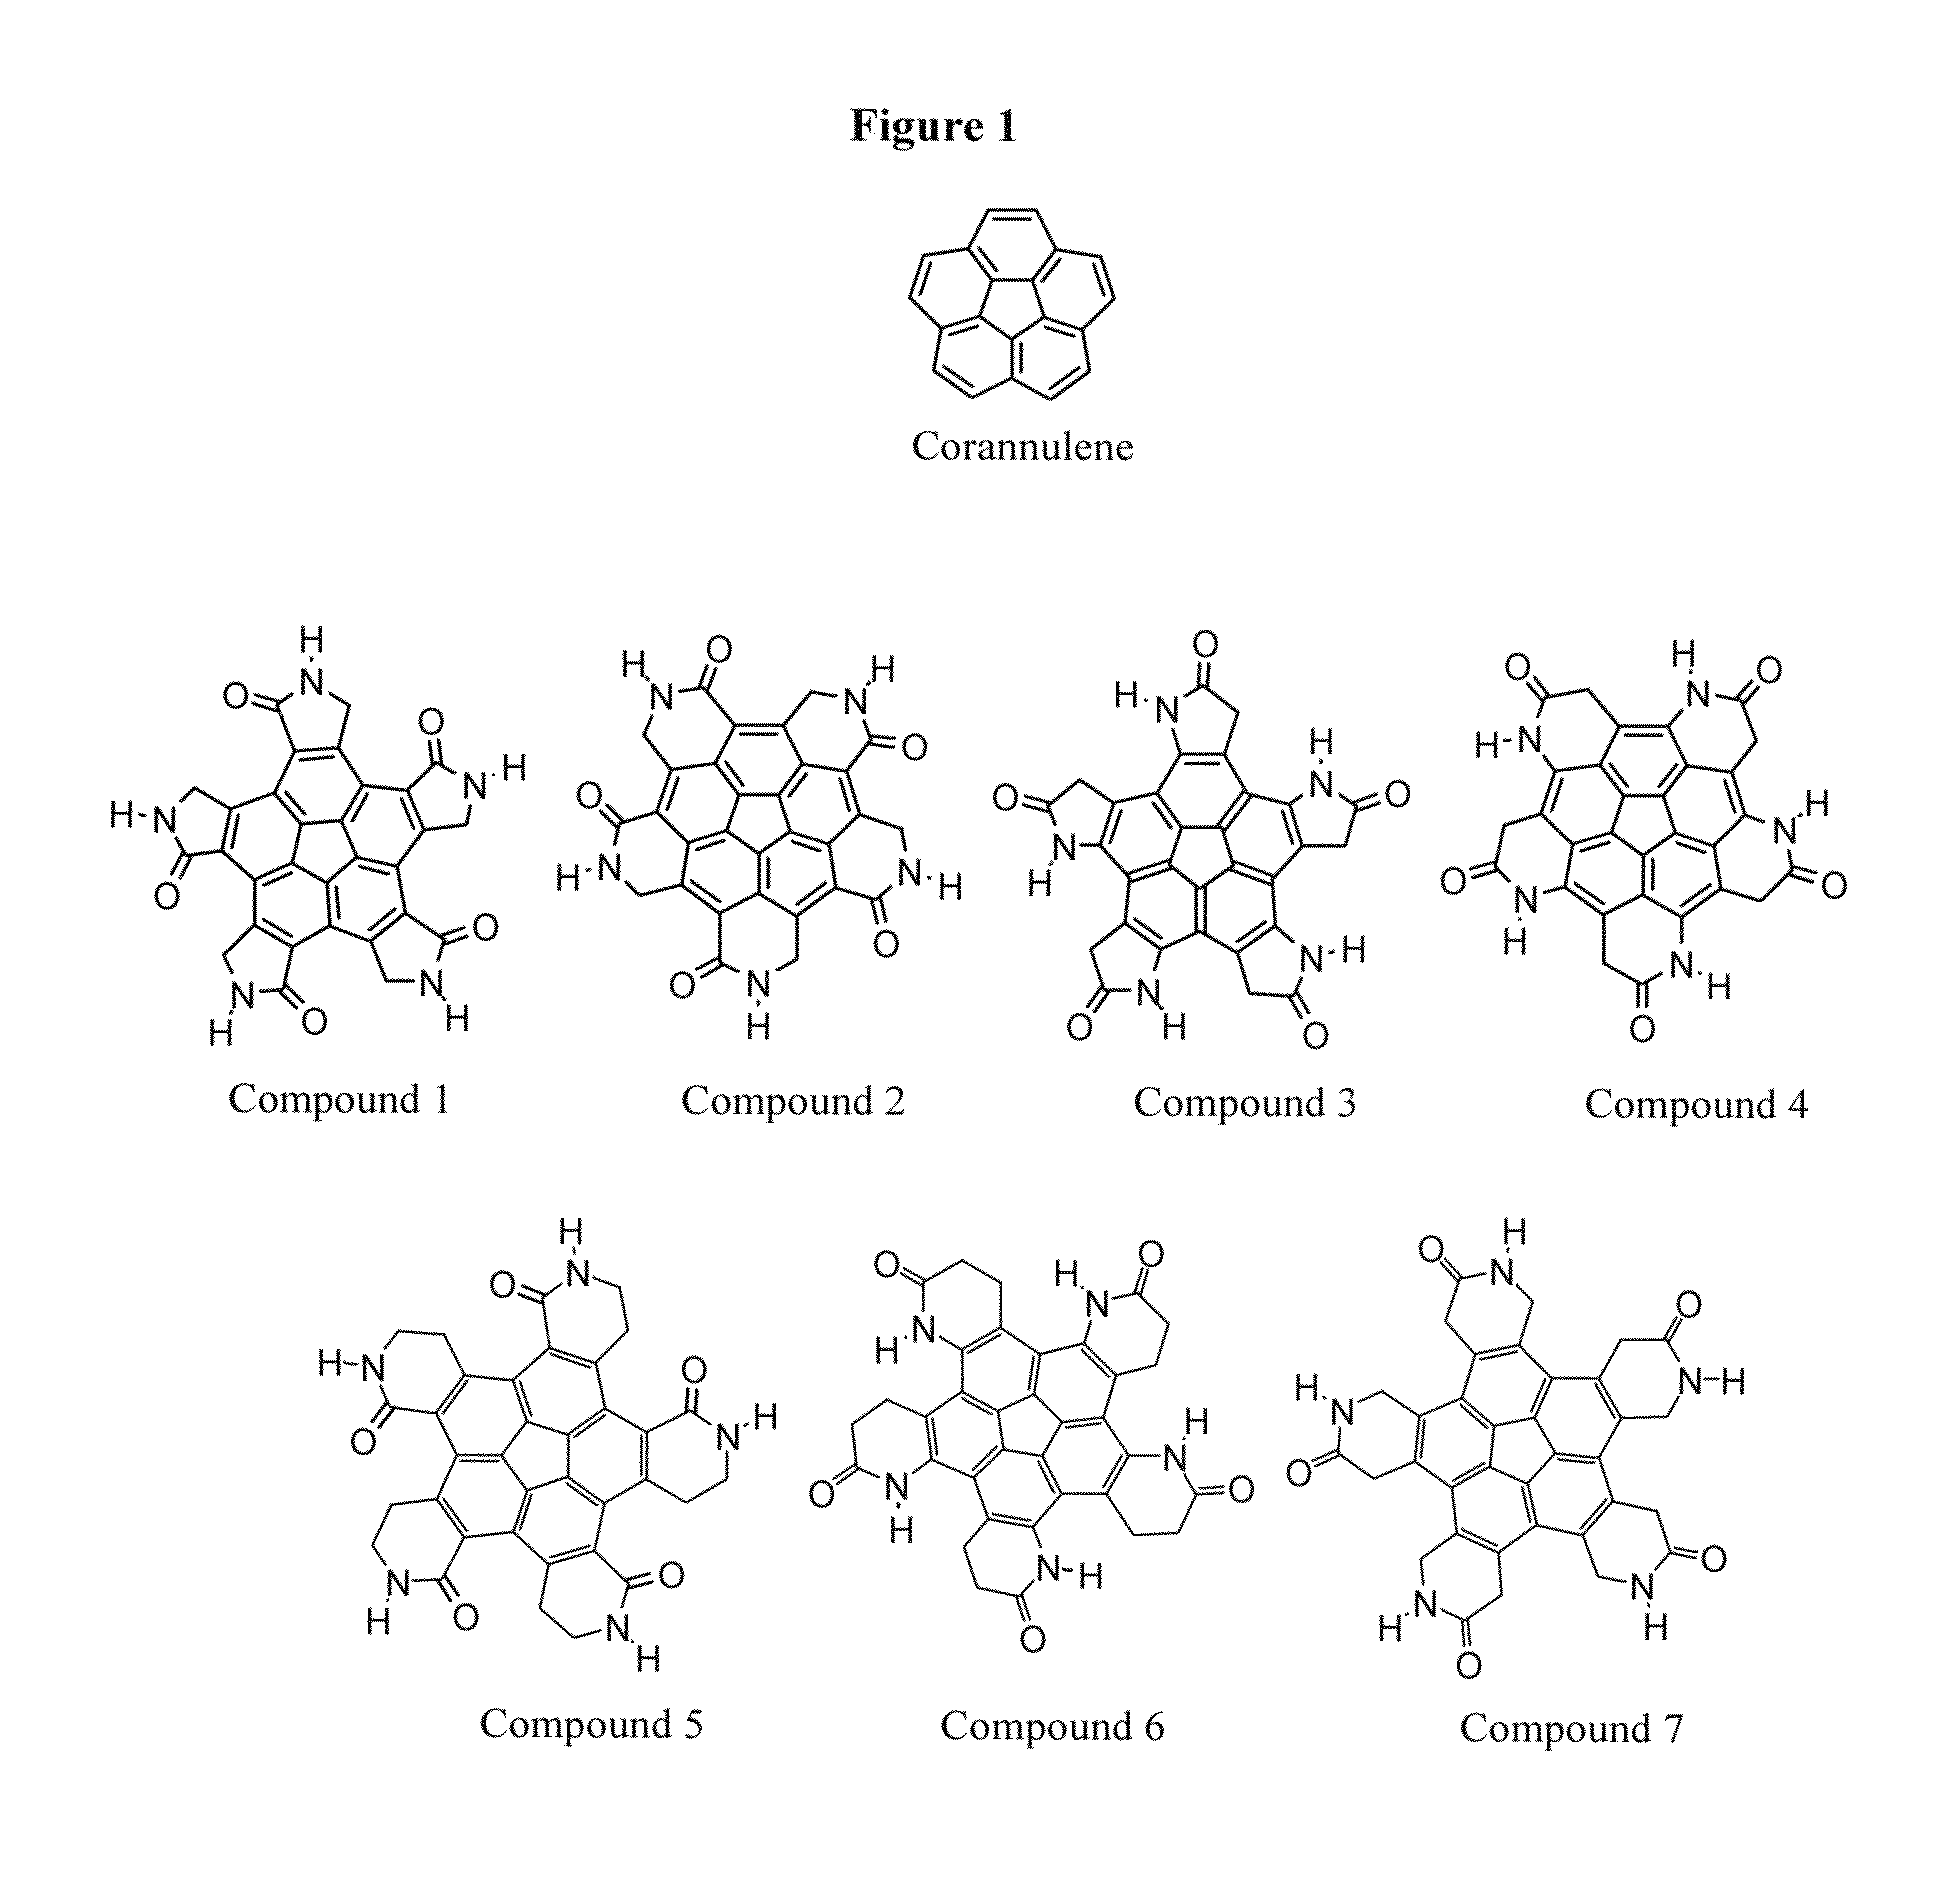 Self-assembled polyhedral multimeric chemical structures